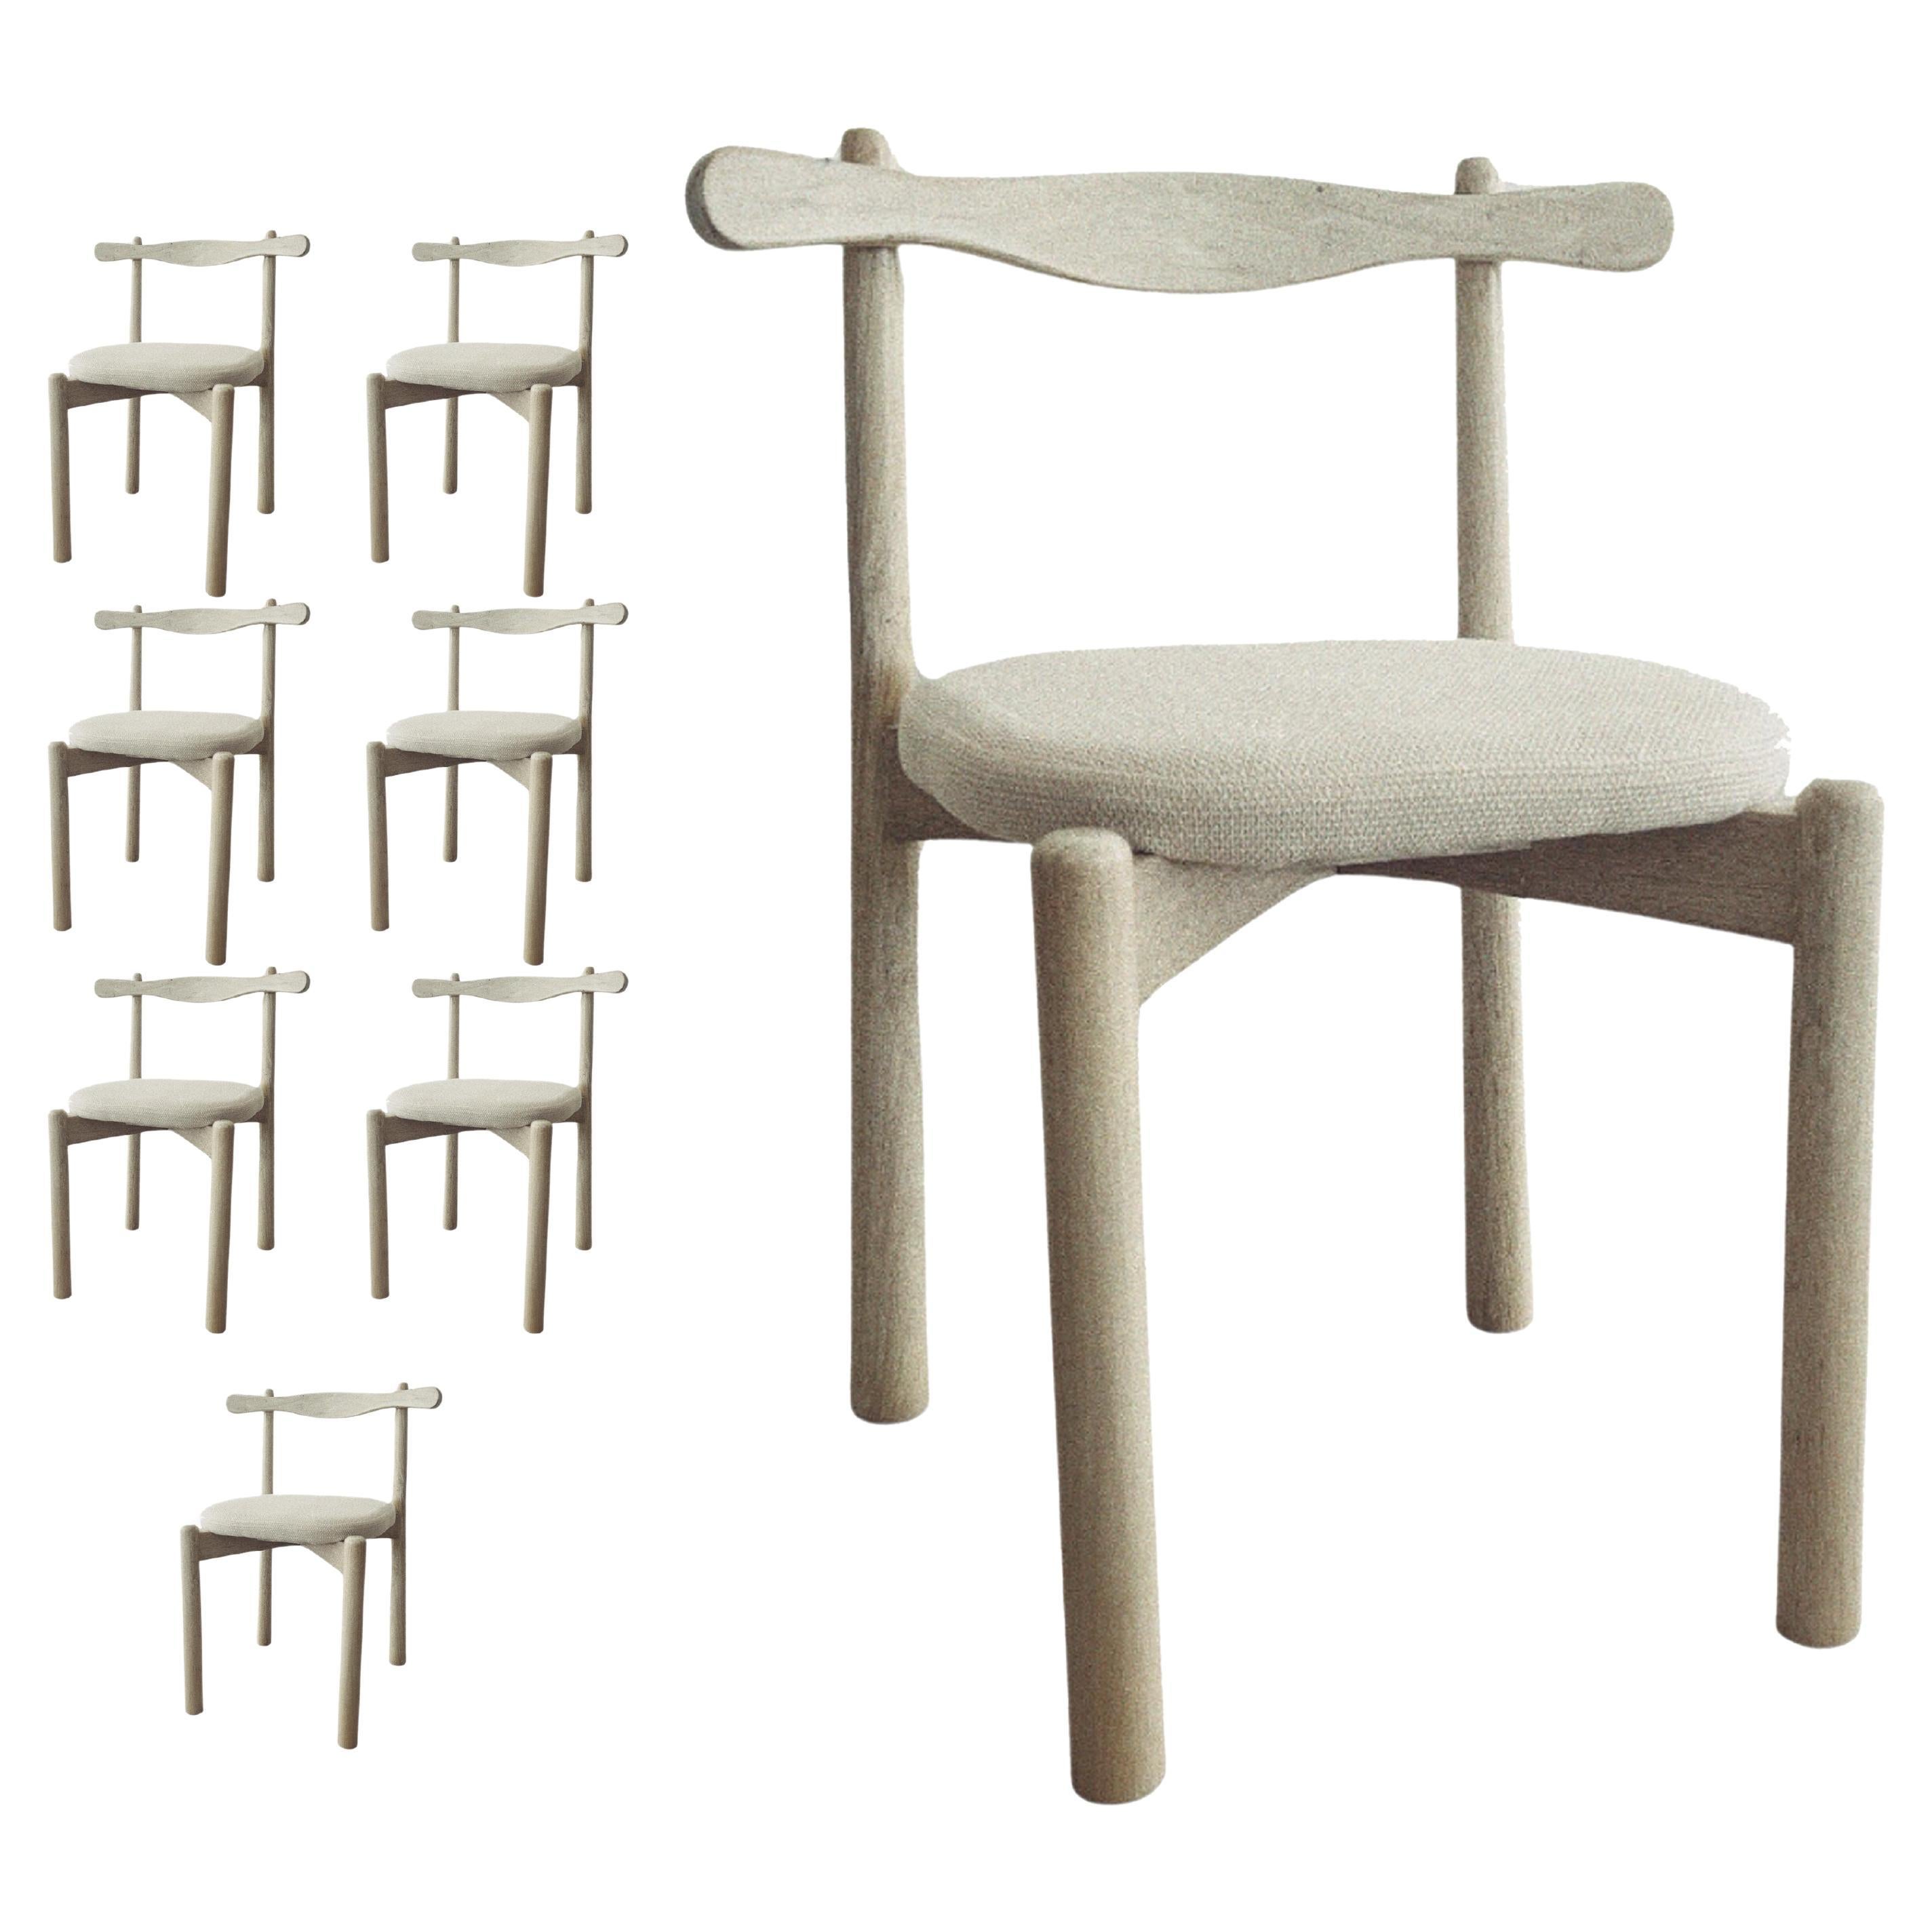 Set of 7 Dining Chairs Uçá NATURAL Wood (fabric ref : F12) Prompt delivery